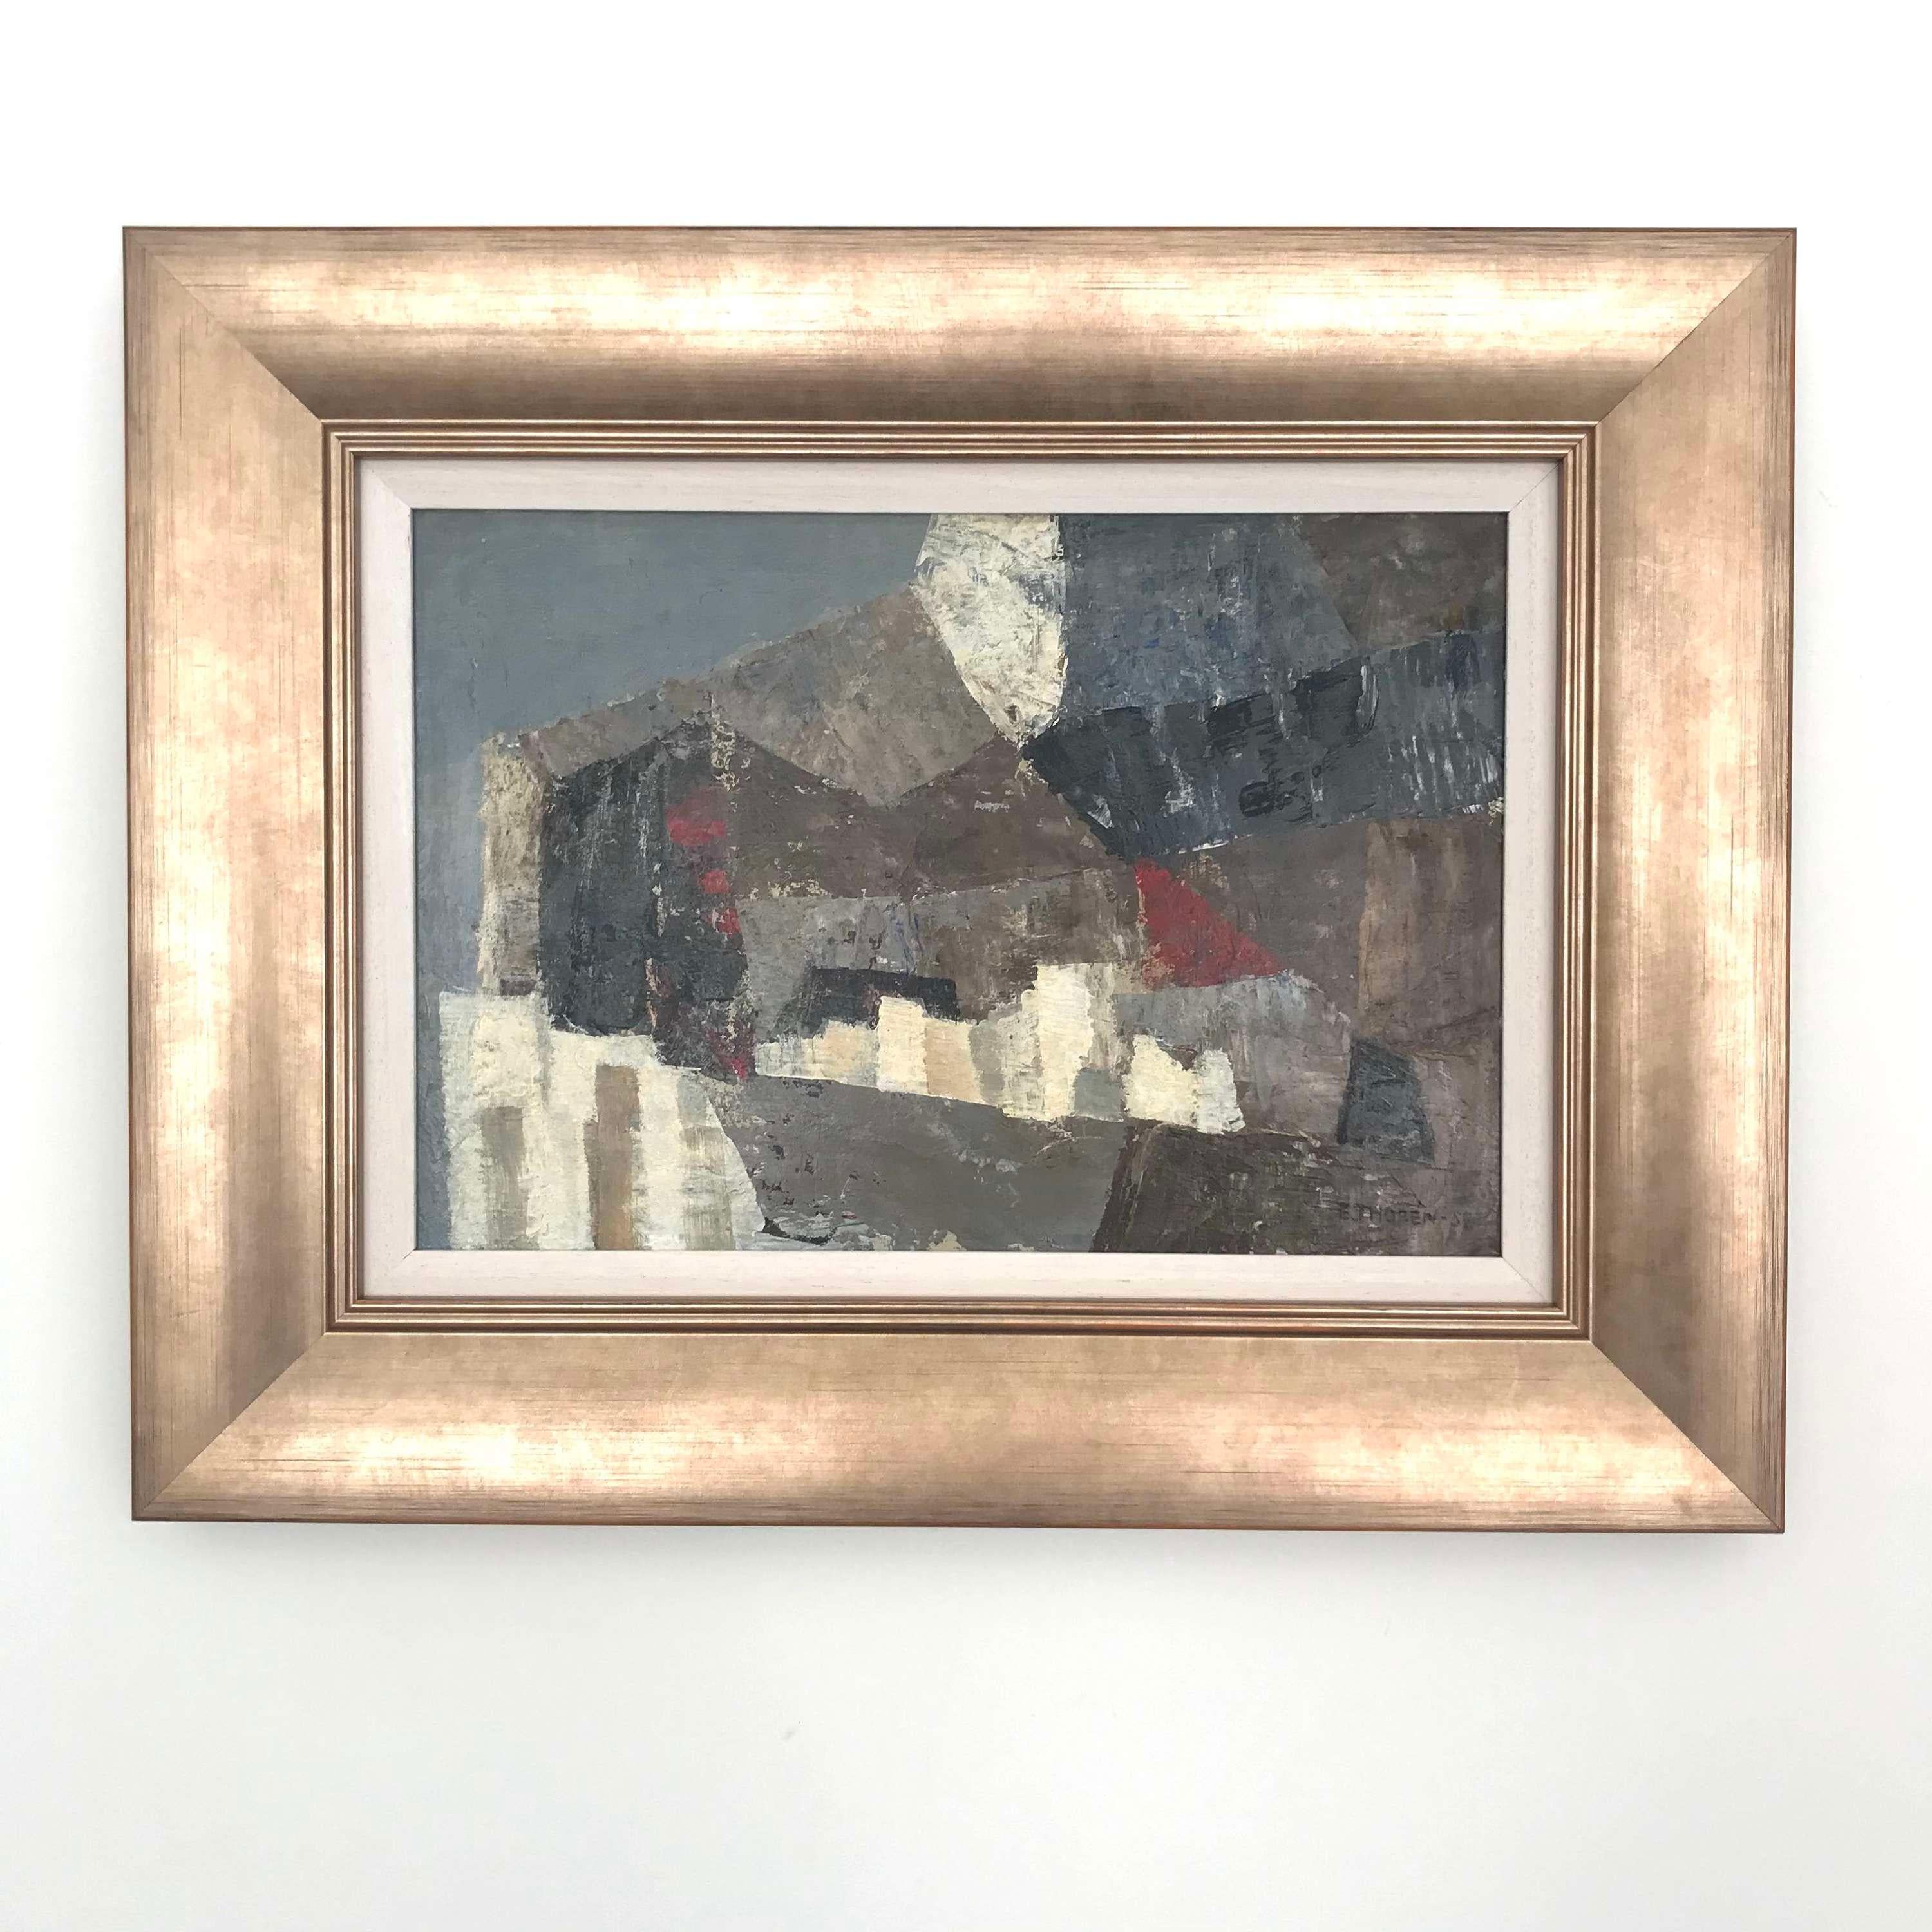 Esaias Thoren Abstract Composition, Oil on Board, Signed and dated '52 bottom right. Image size 9.1x13.3 inches.


Esaias Thorén (1901-81) was a leading Swedish artist who studied in Paris in the 1920s with Carl Wilhelmson. While there he visited